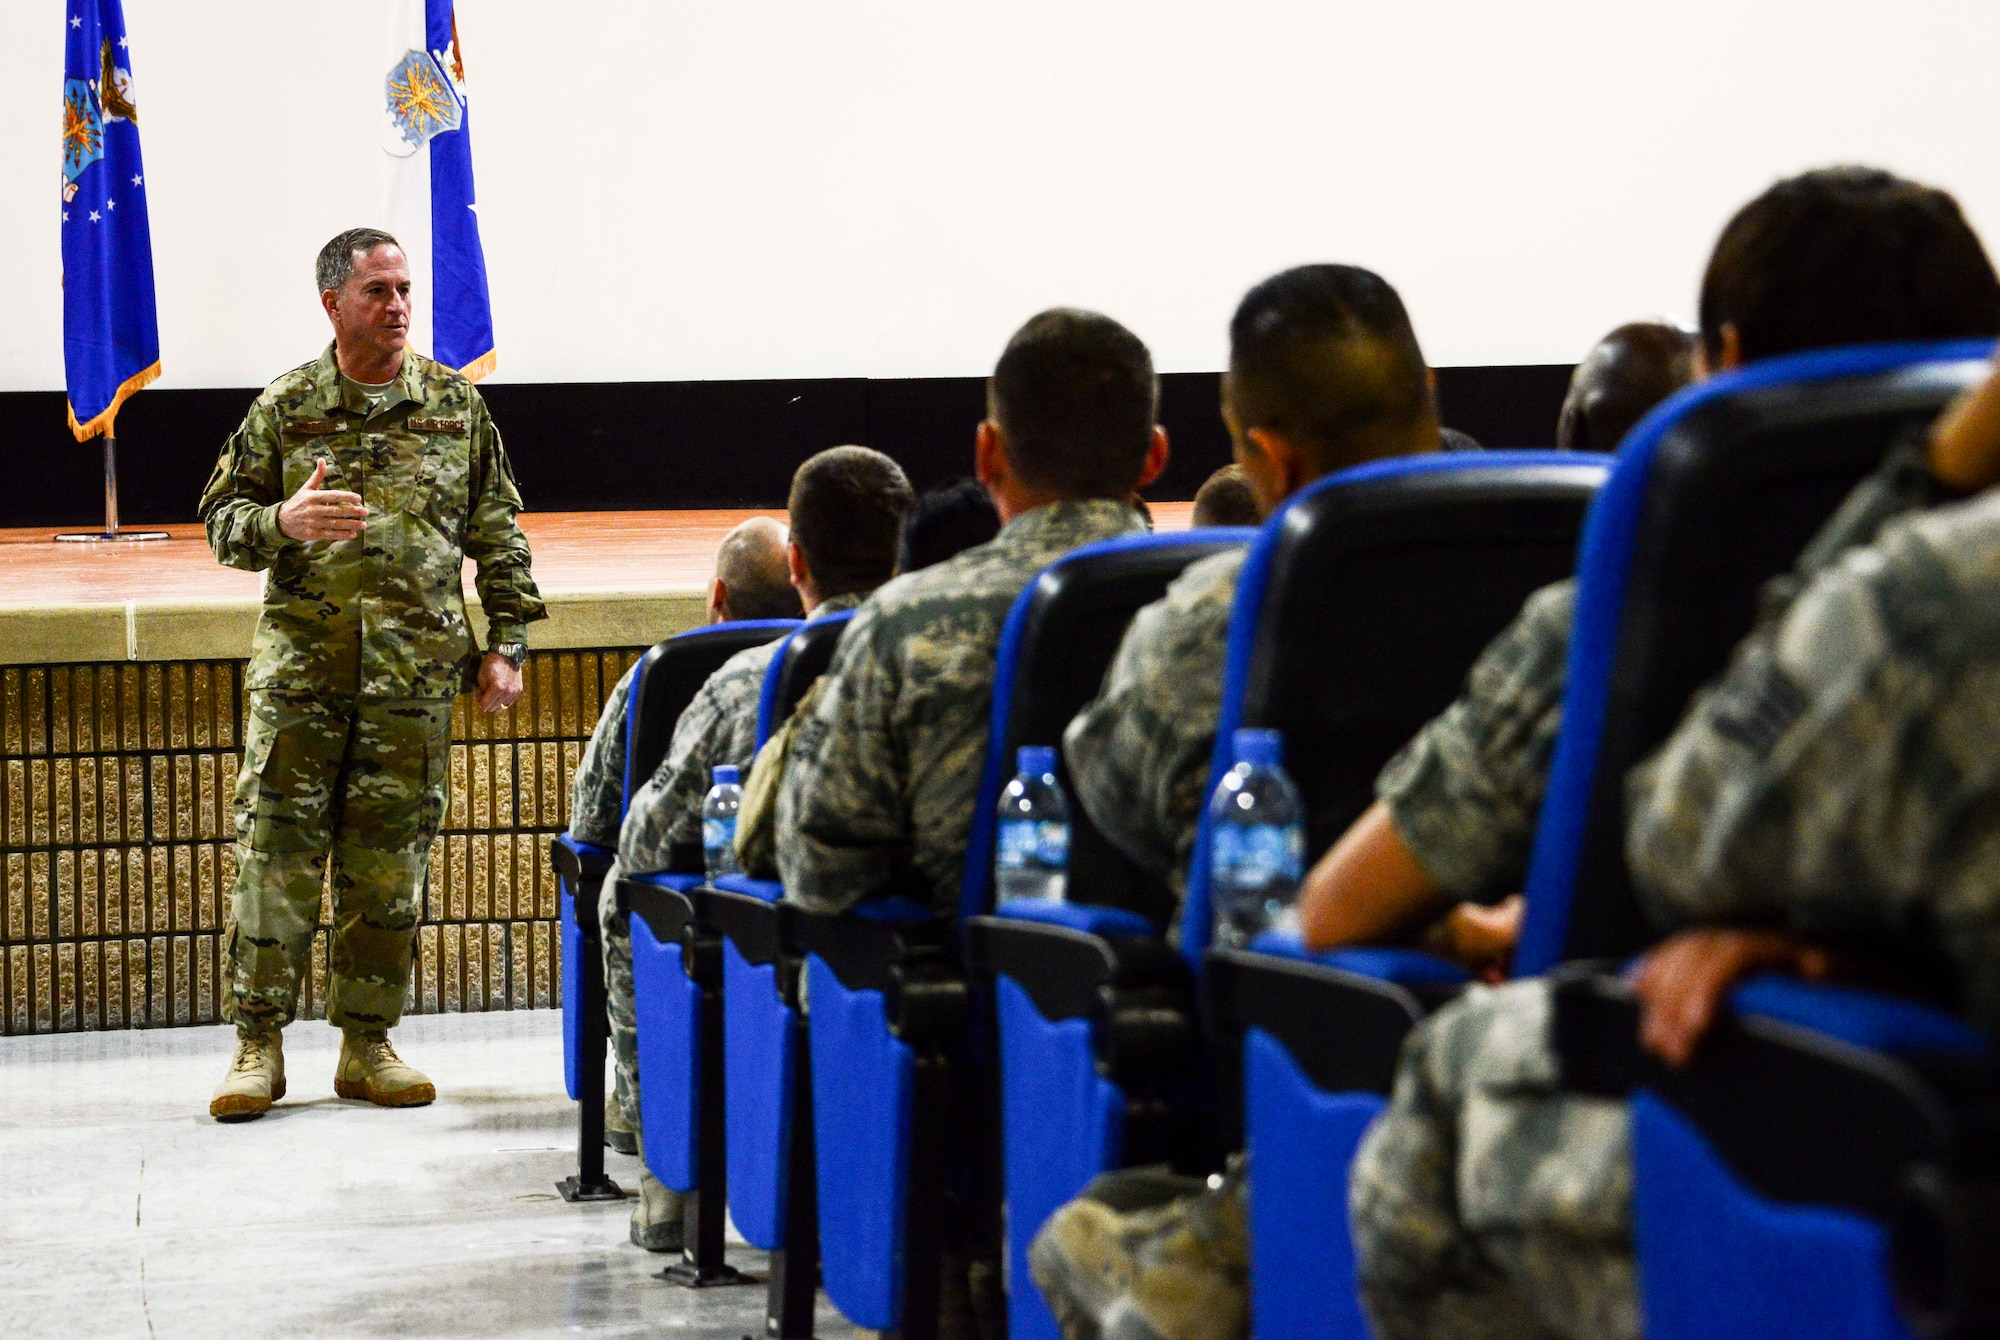 Chief of Staff of the Air Force Gen. David L. Goldfein discusses his top priorities with deployed Airmen during an all-call Aug. 14, 2016, at Al Udeid Air Base, Qatar. Goldfein discussed the current state of the Air Force and what he envisions as the future of the force. (U.S. Air Force photo/Senior Airman Janelle Patiño/Released)